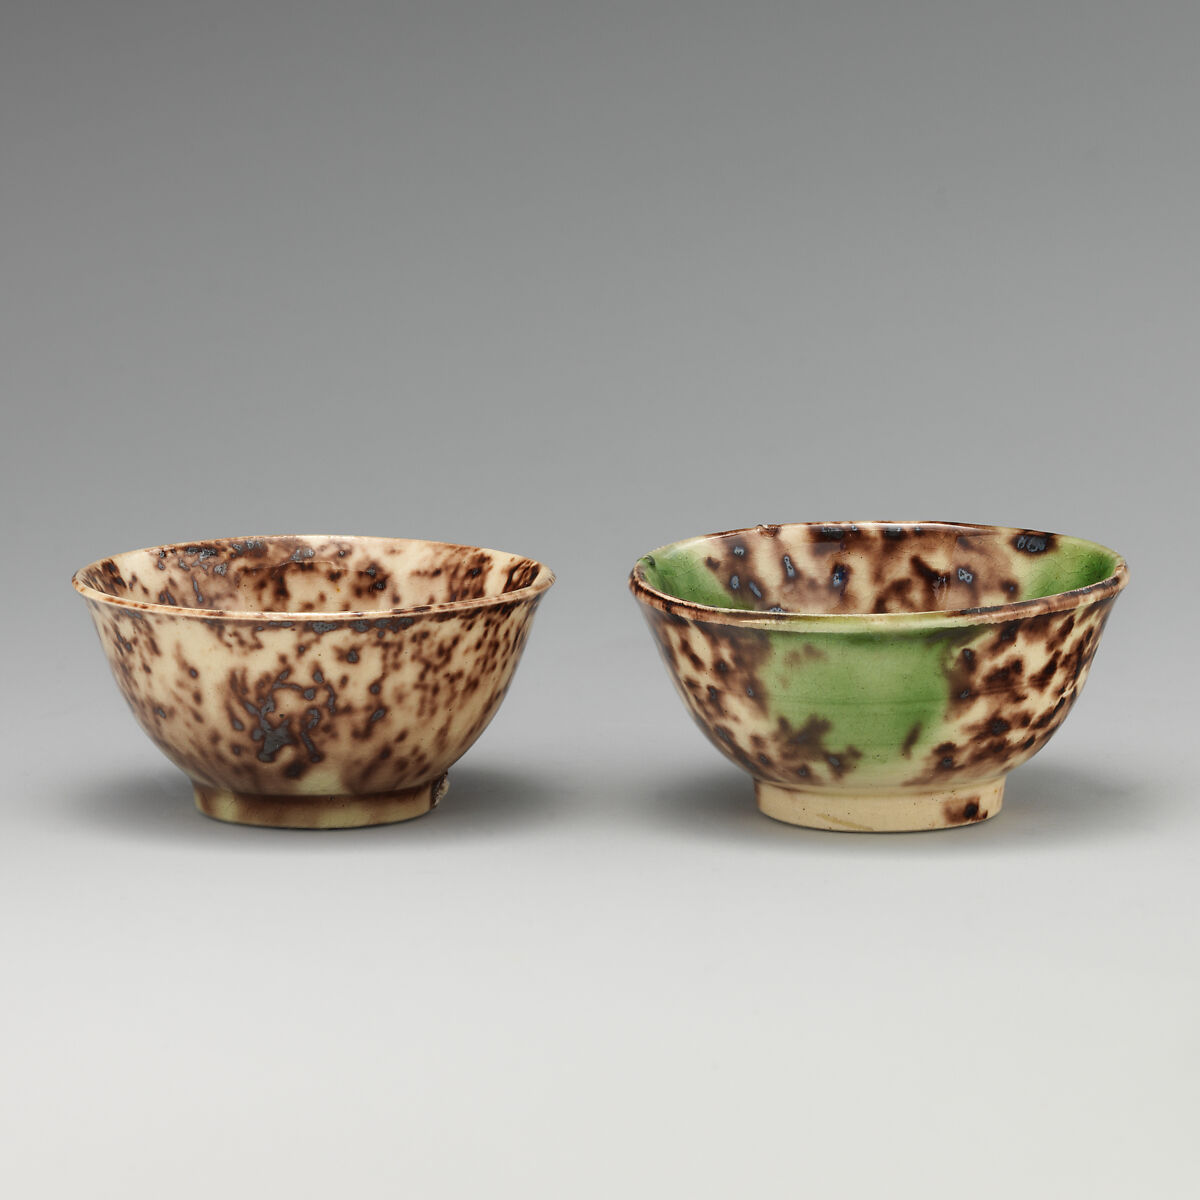 Pair of miniature bowls, Style of Whieldon type, Lead-glazed earthenware, British, Staffordshire 